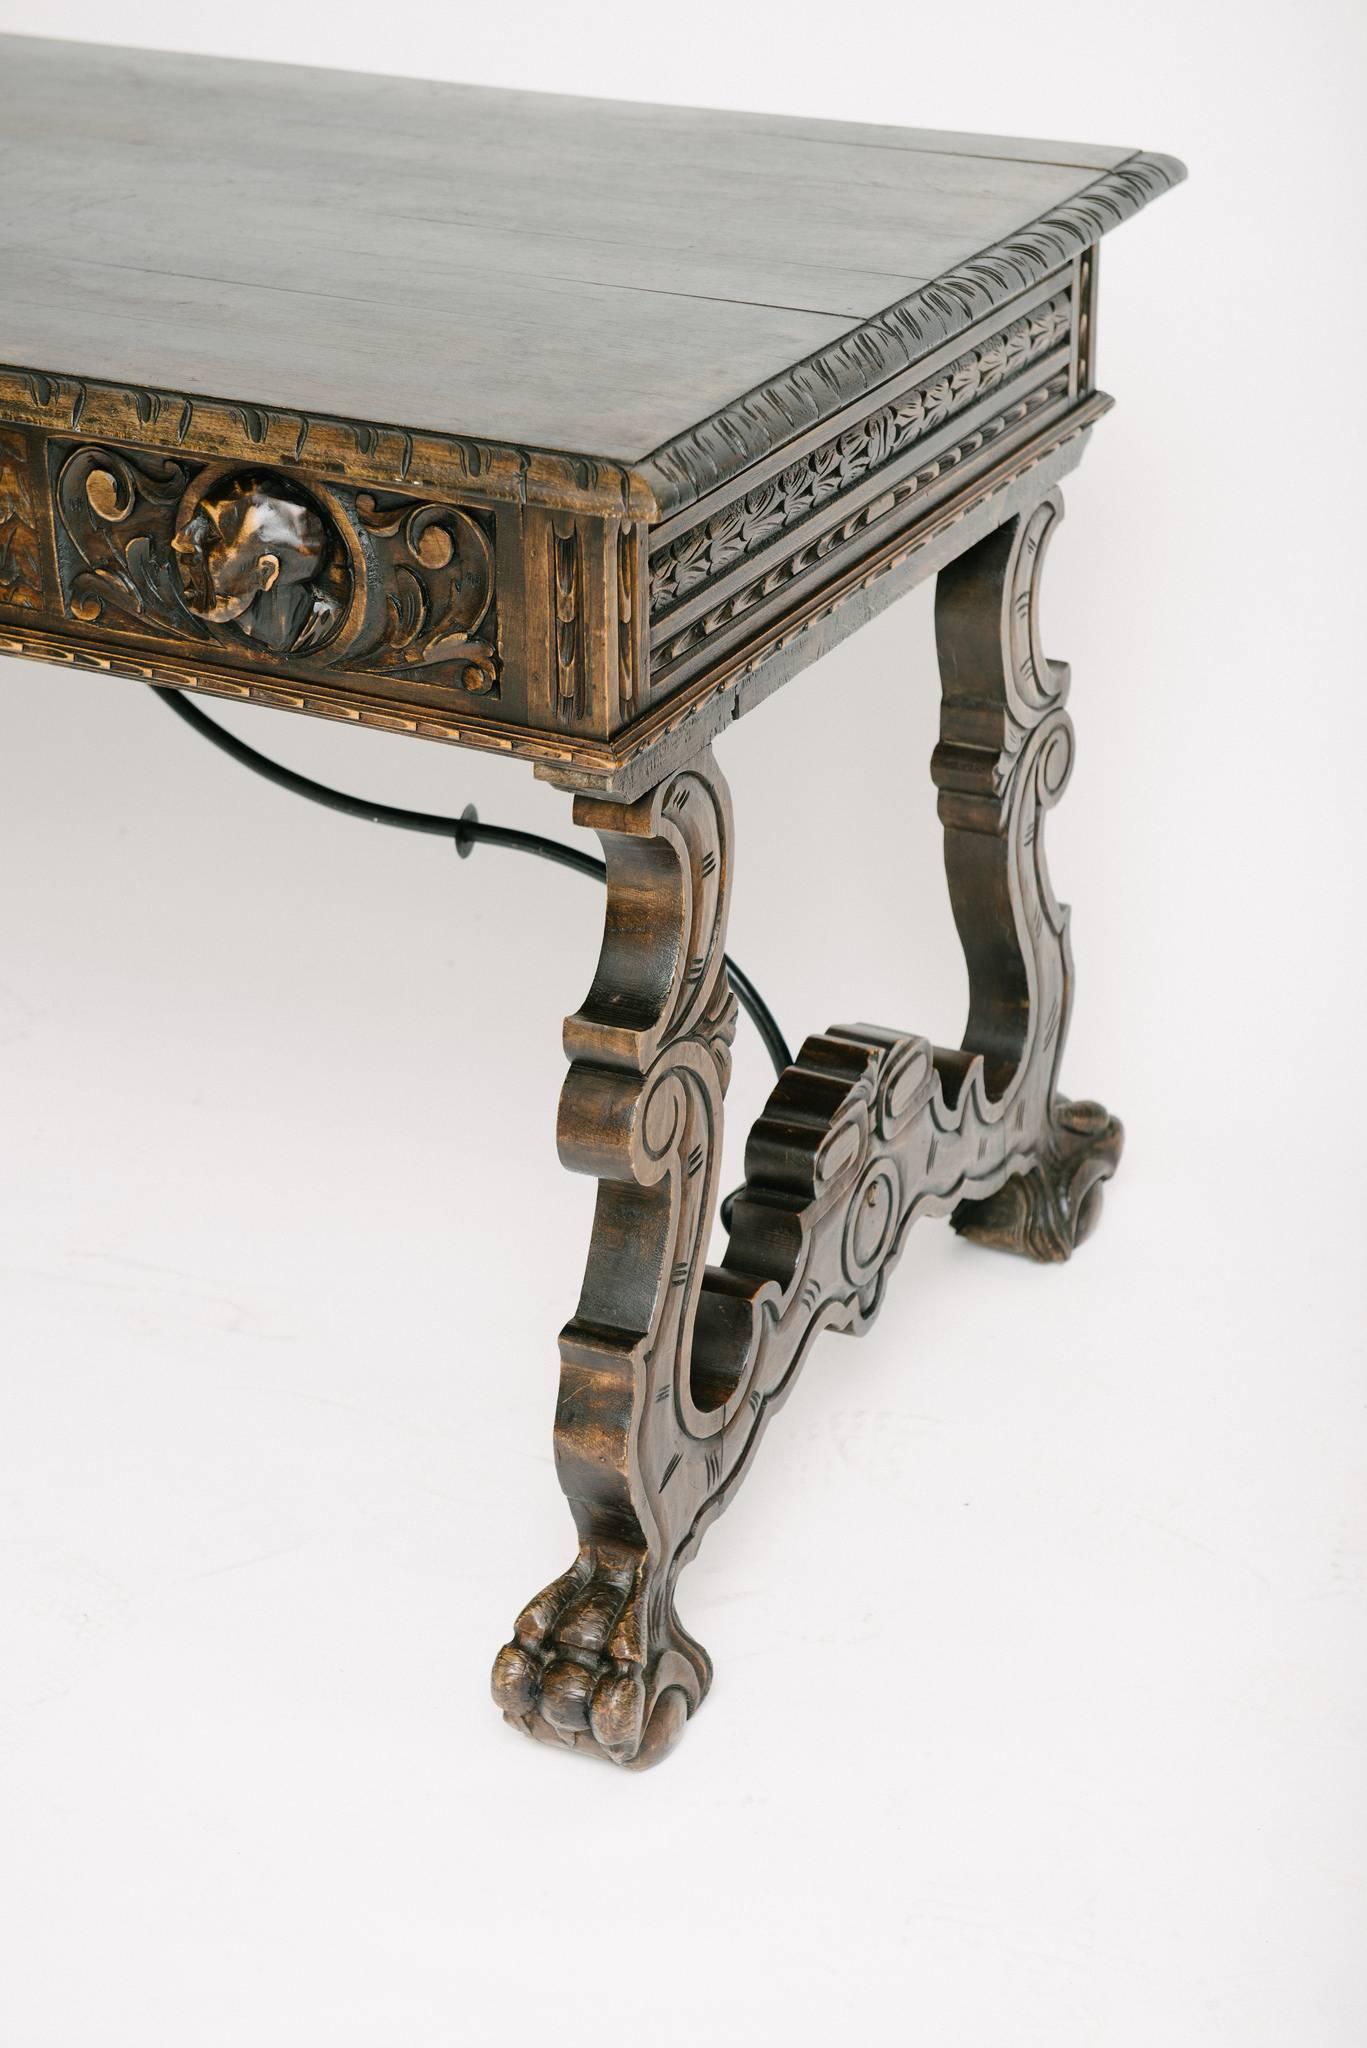 An ornately carved Renaissance style desk with three drawers and iron stretcher.